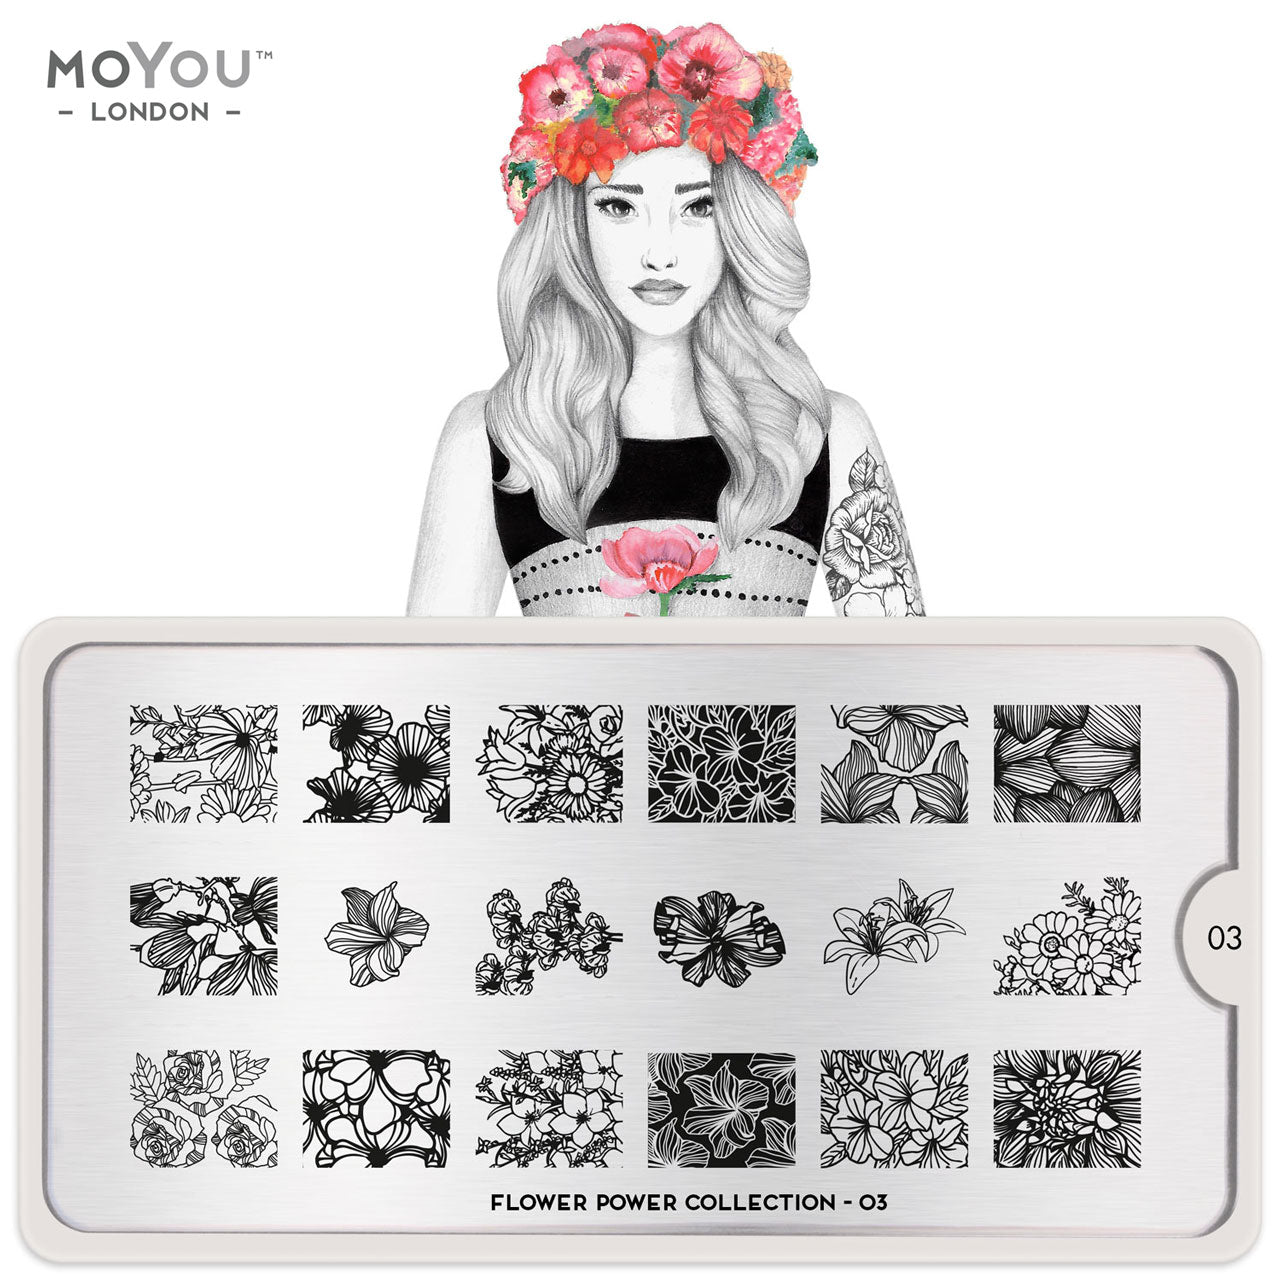 Plaque Stamping Flower Power 03 - MoYou London